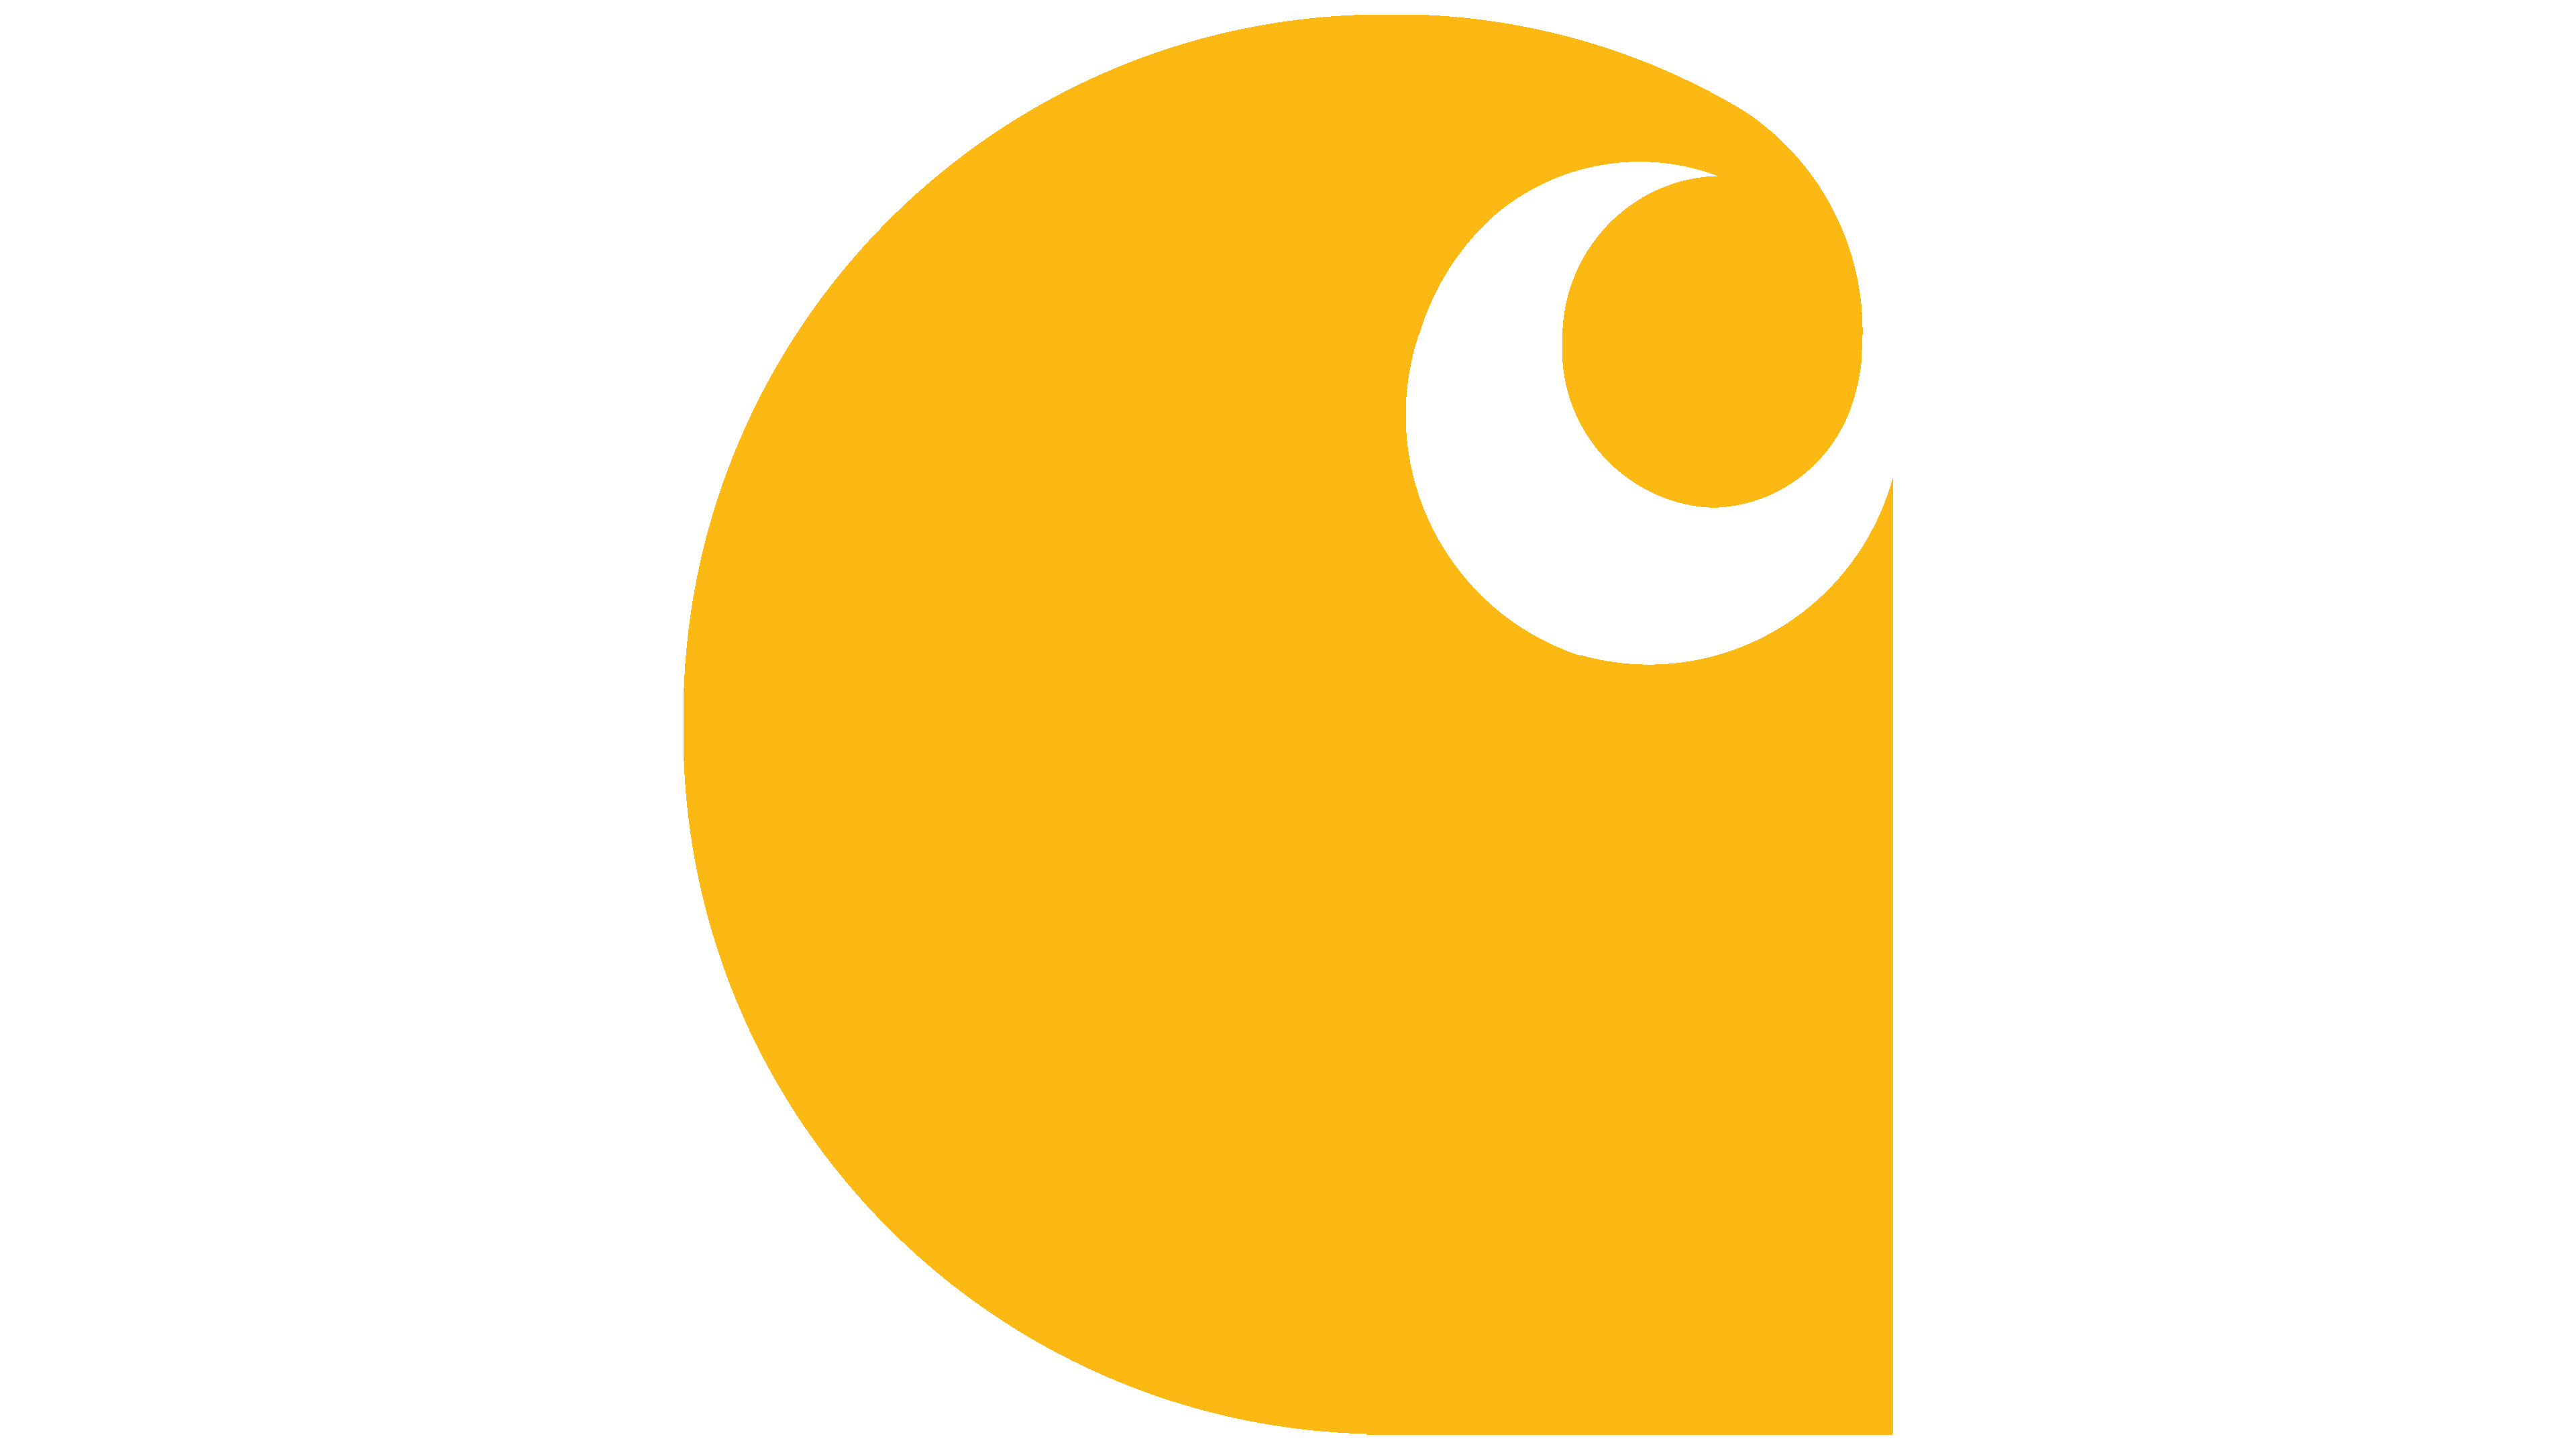 Carhartt Logo, symbol, meaning, history, PNG, brand